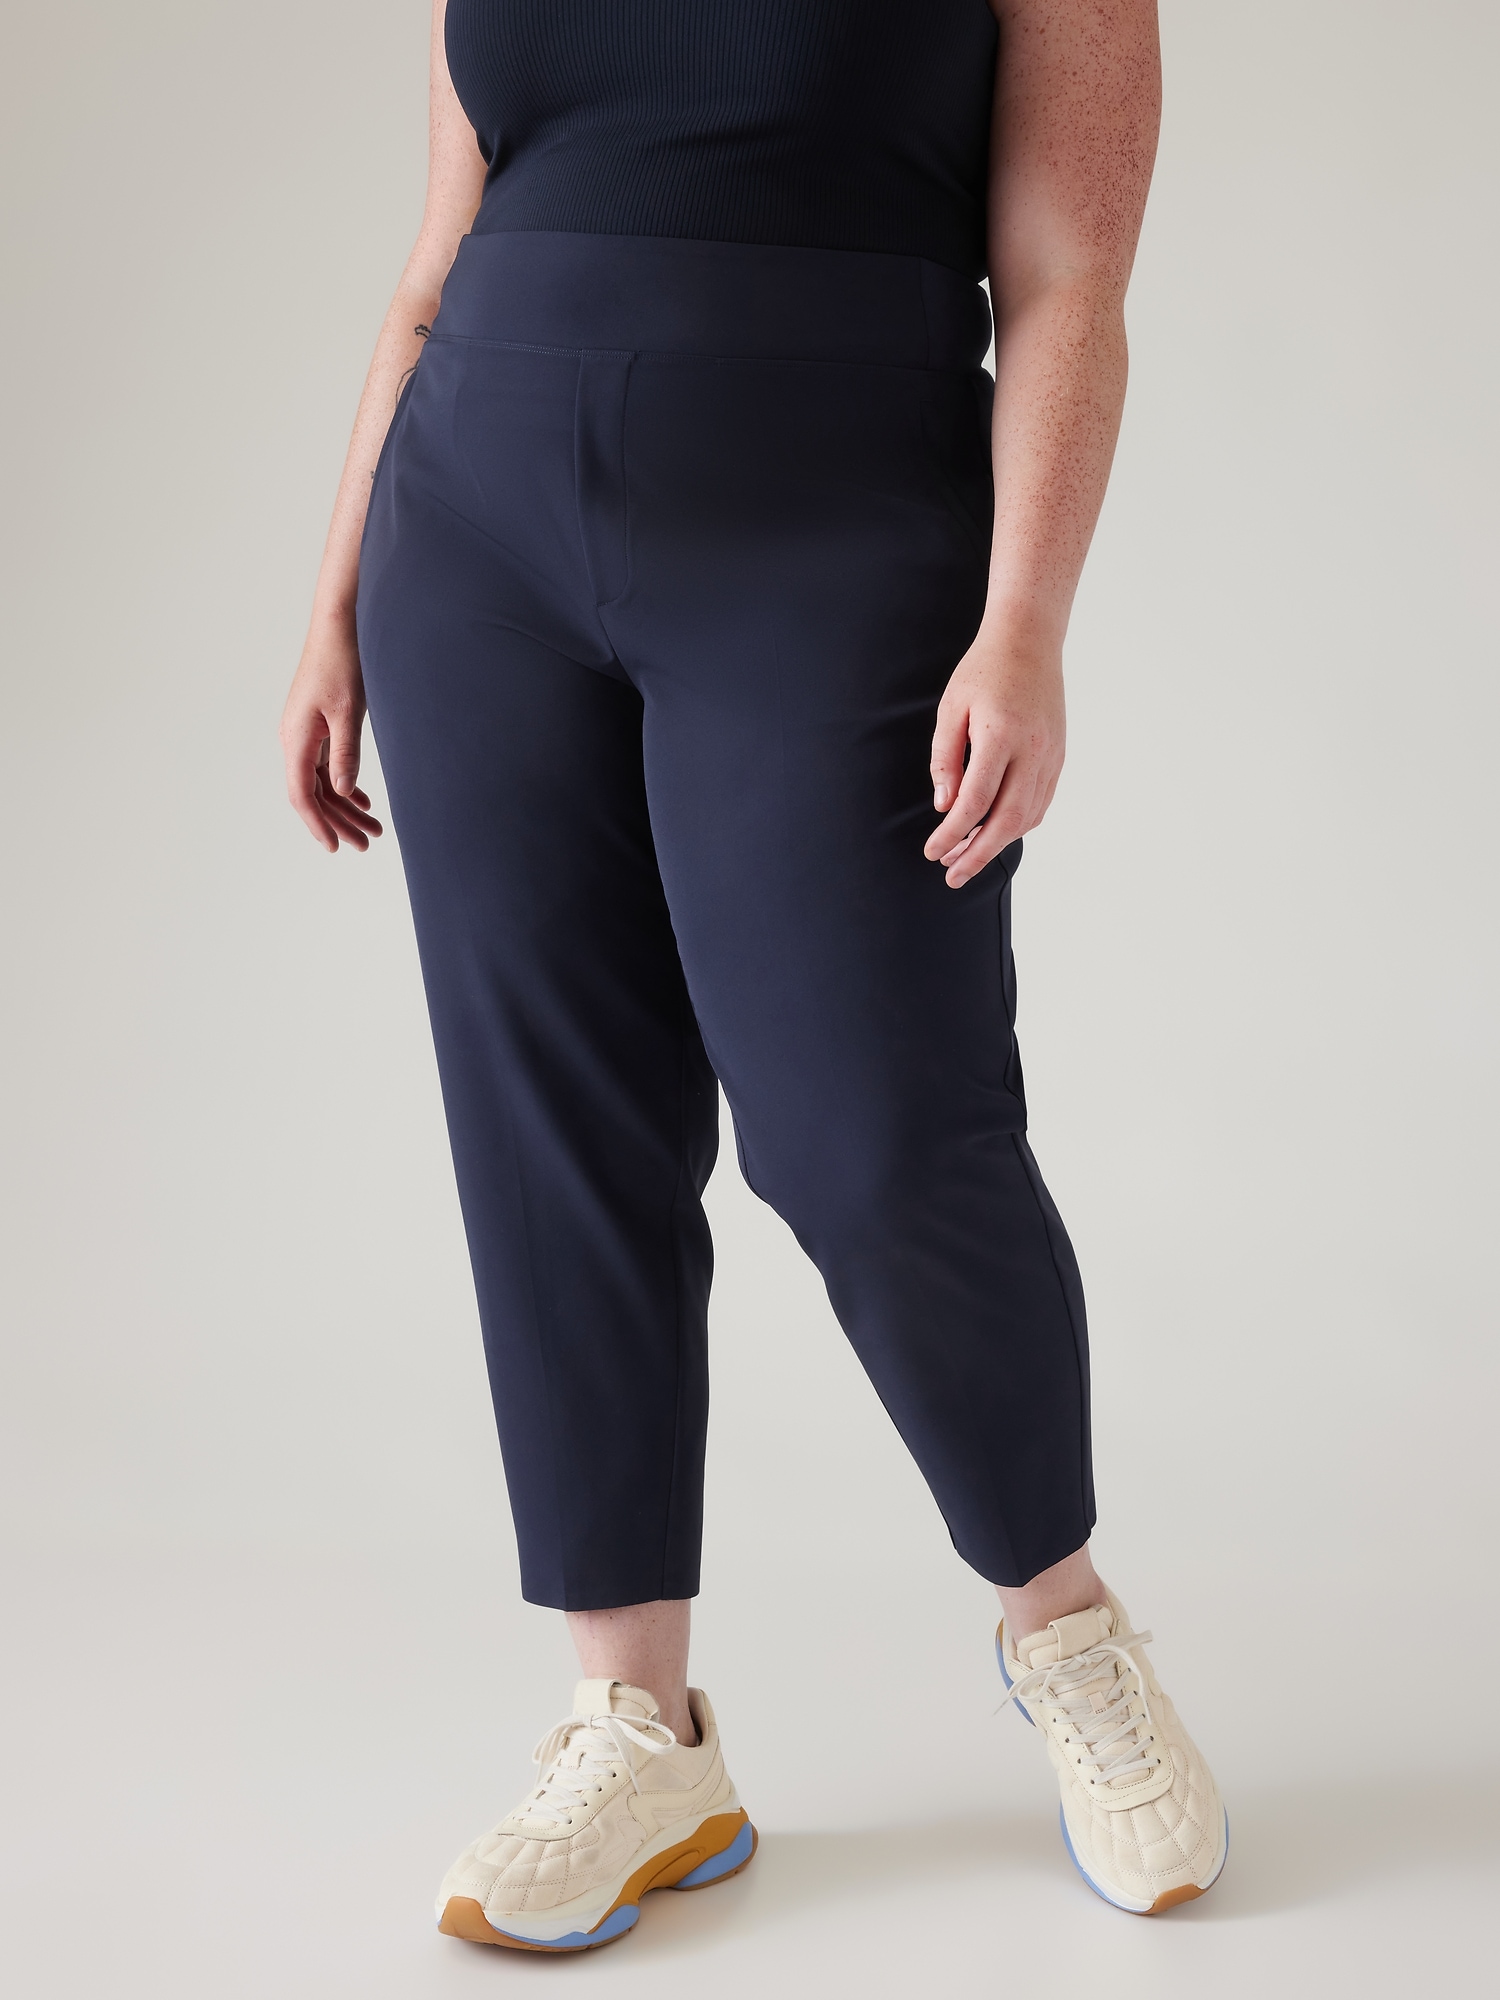 NWT Athleta Cosmic Pant XXS Navy #531089 Pull On Wide Waist Travel Relaxed  Fit n